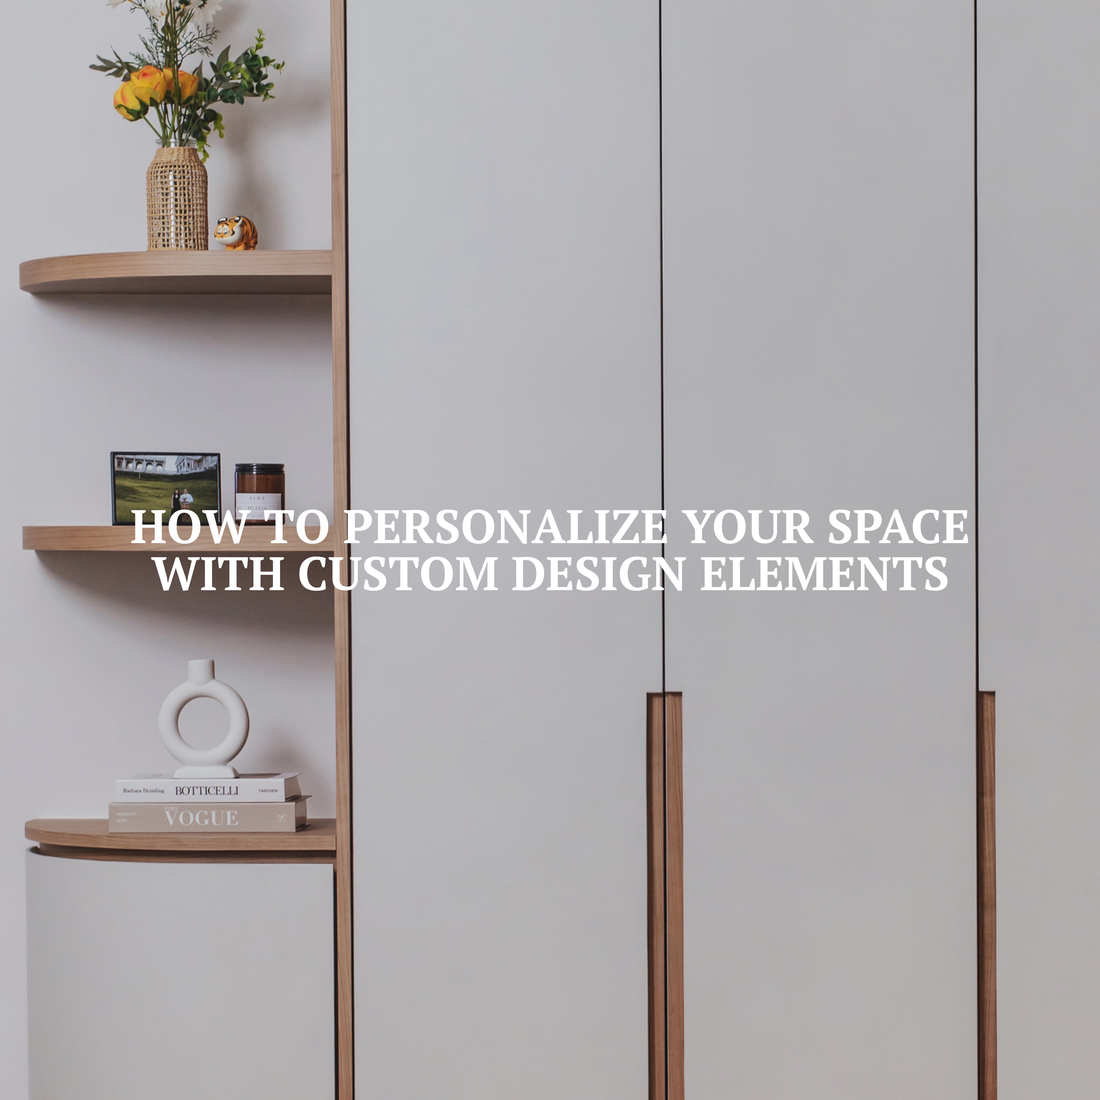 How To Personalize Your Space With Custom Design Elements